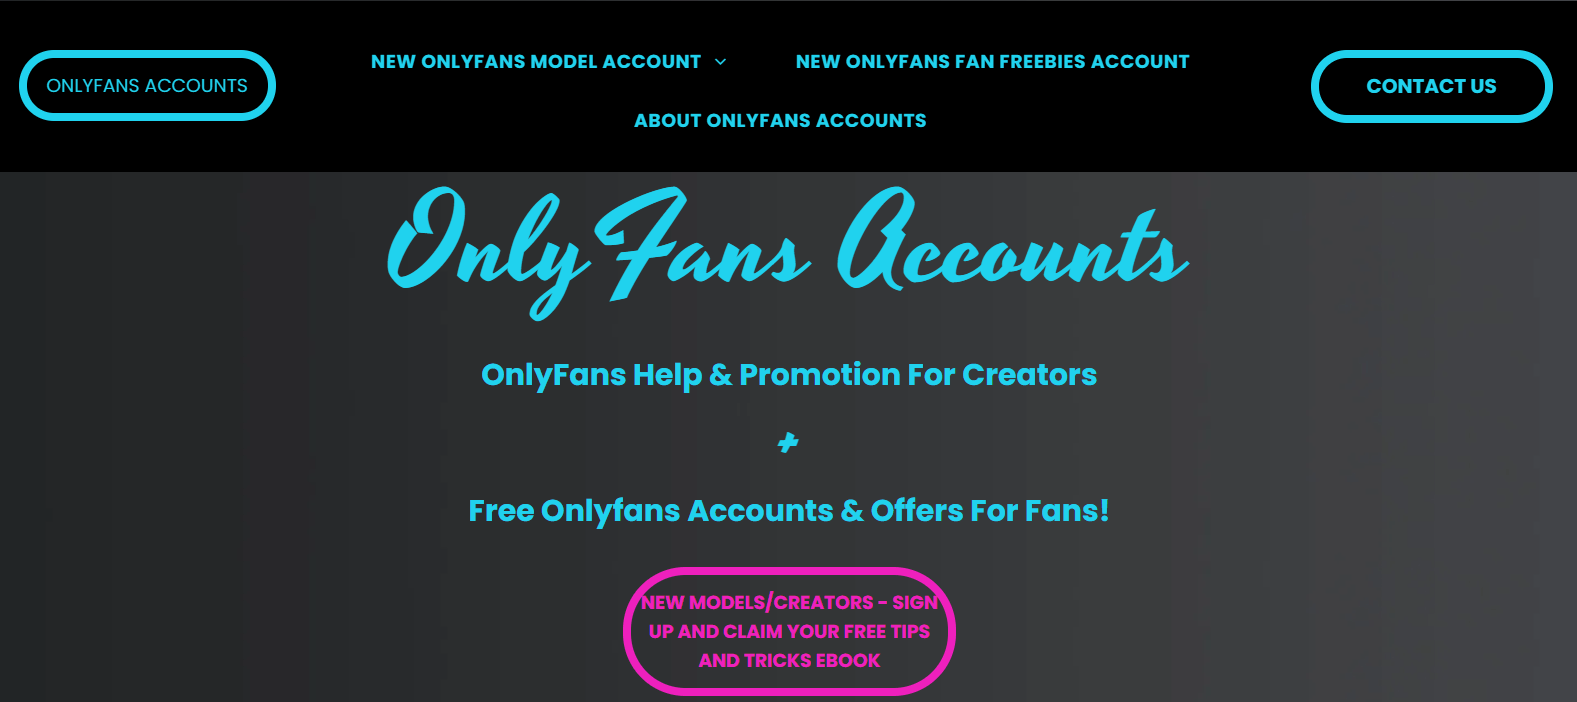 Can you give free access to onlyfans